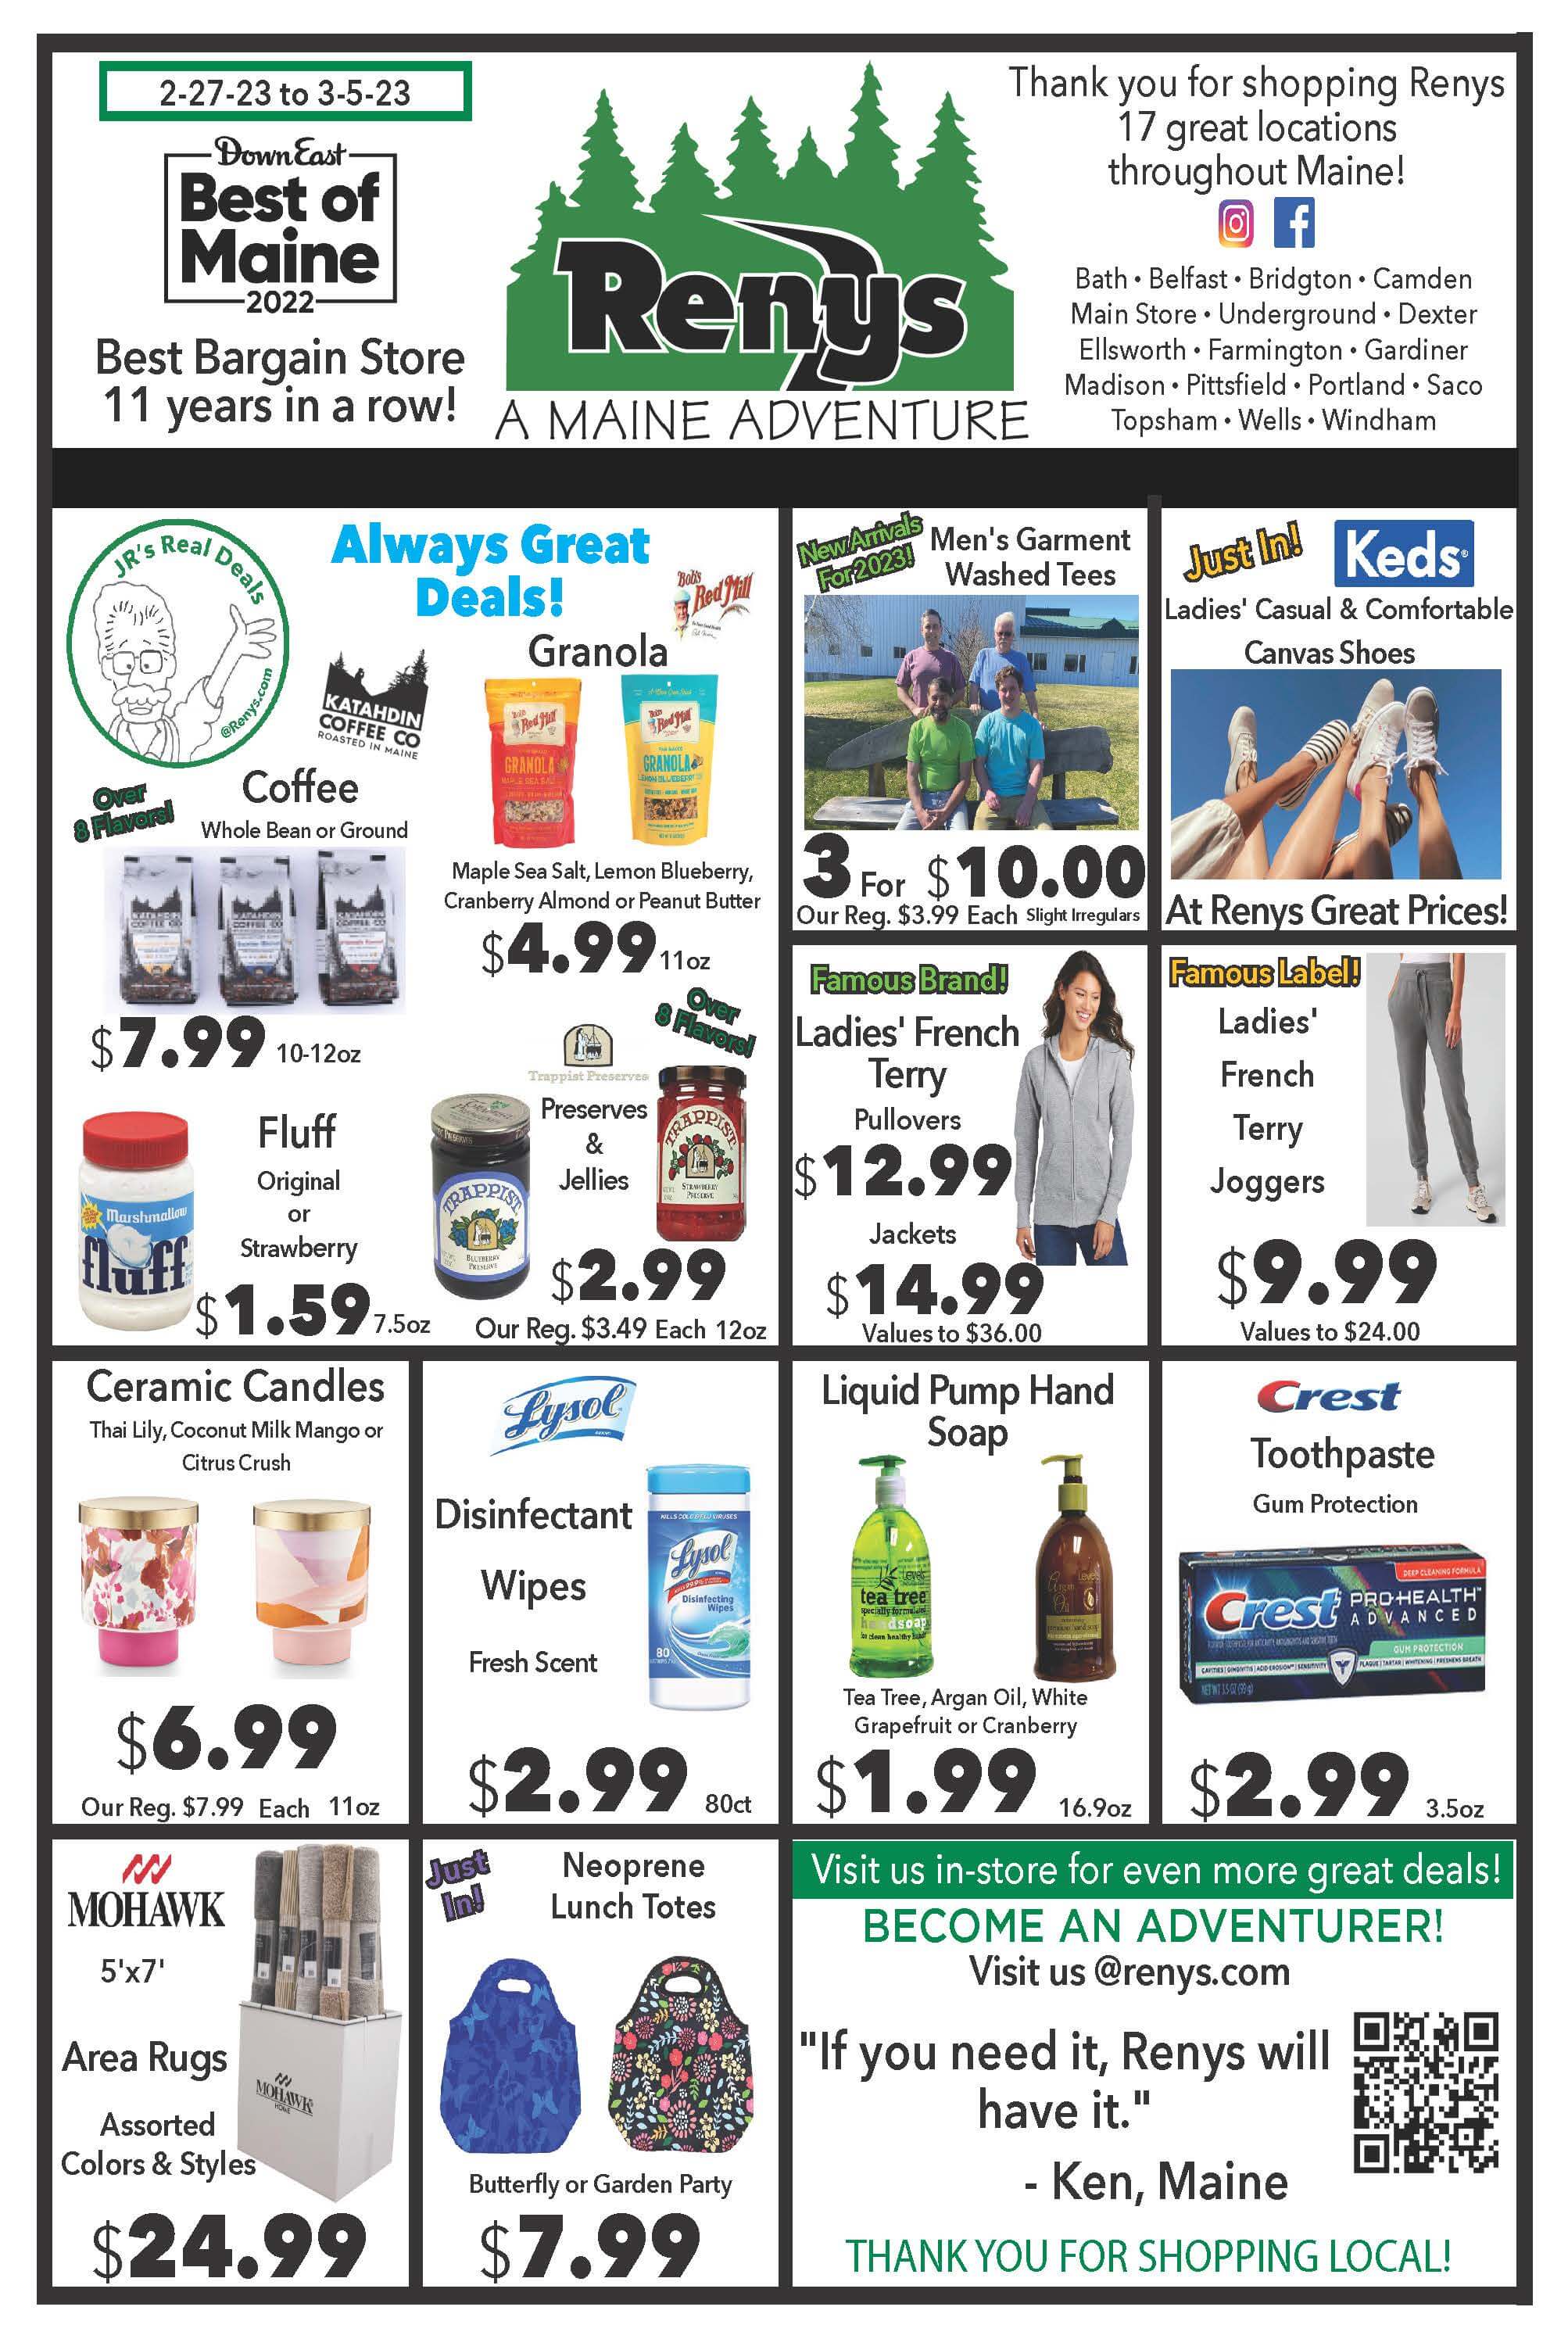 2/27/23 - 3/5/23 Weekly Flyer